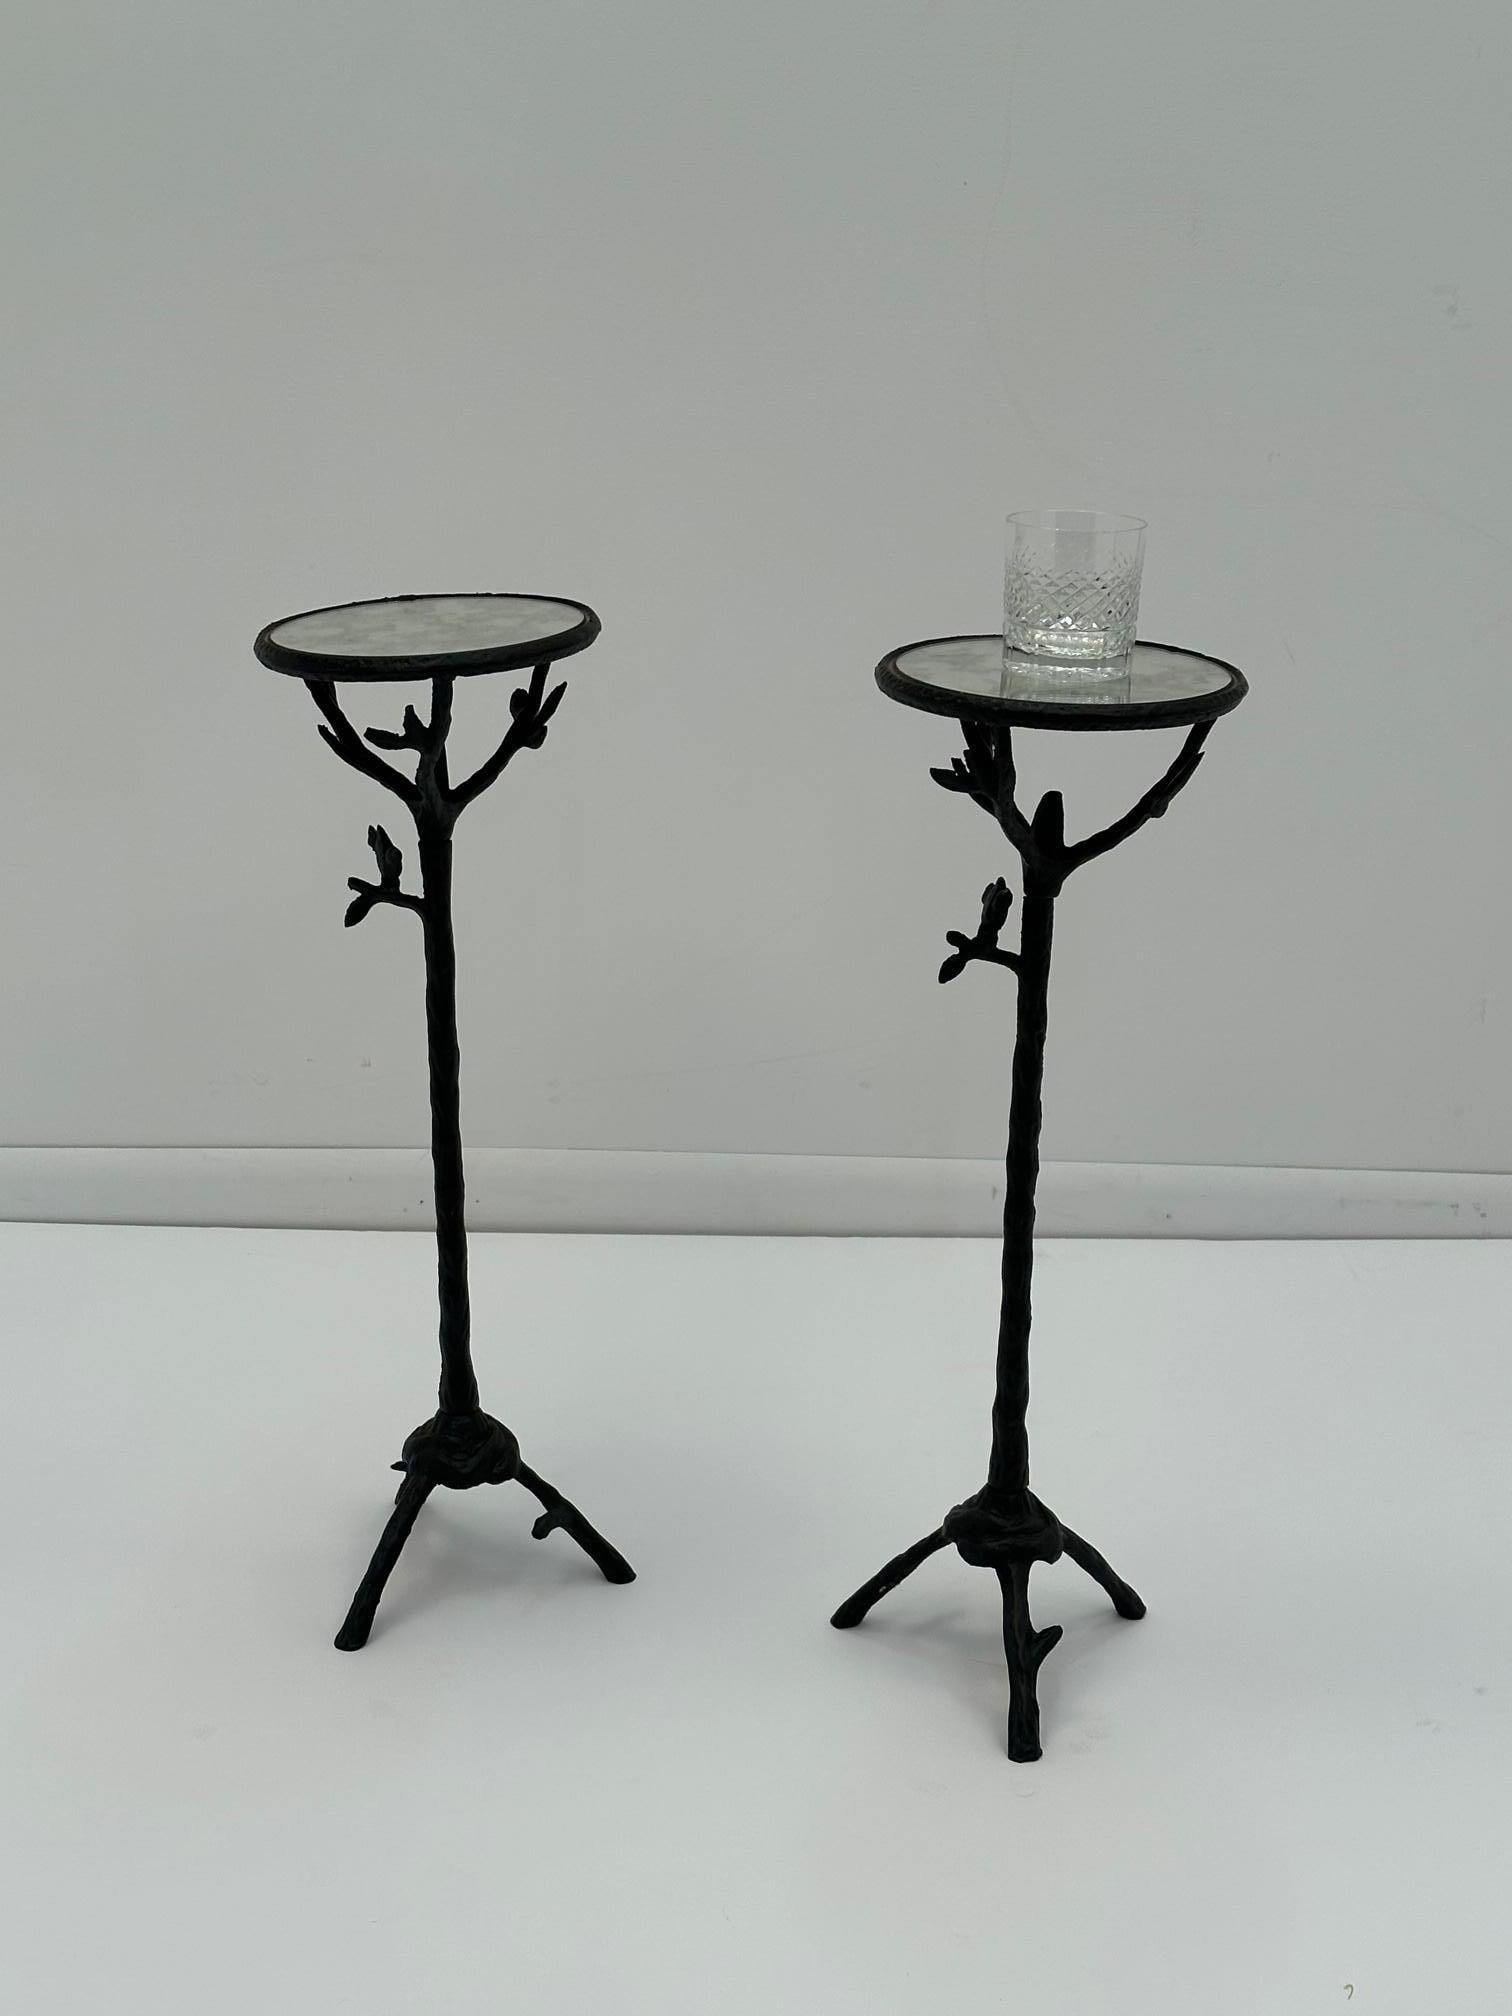 Whimsical pair of round iron sculpted martini tables having the look of twiggy branches and a couple of perched birds. The round glass tops are mirrored.